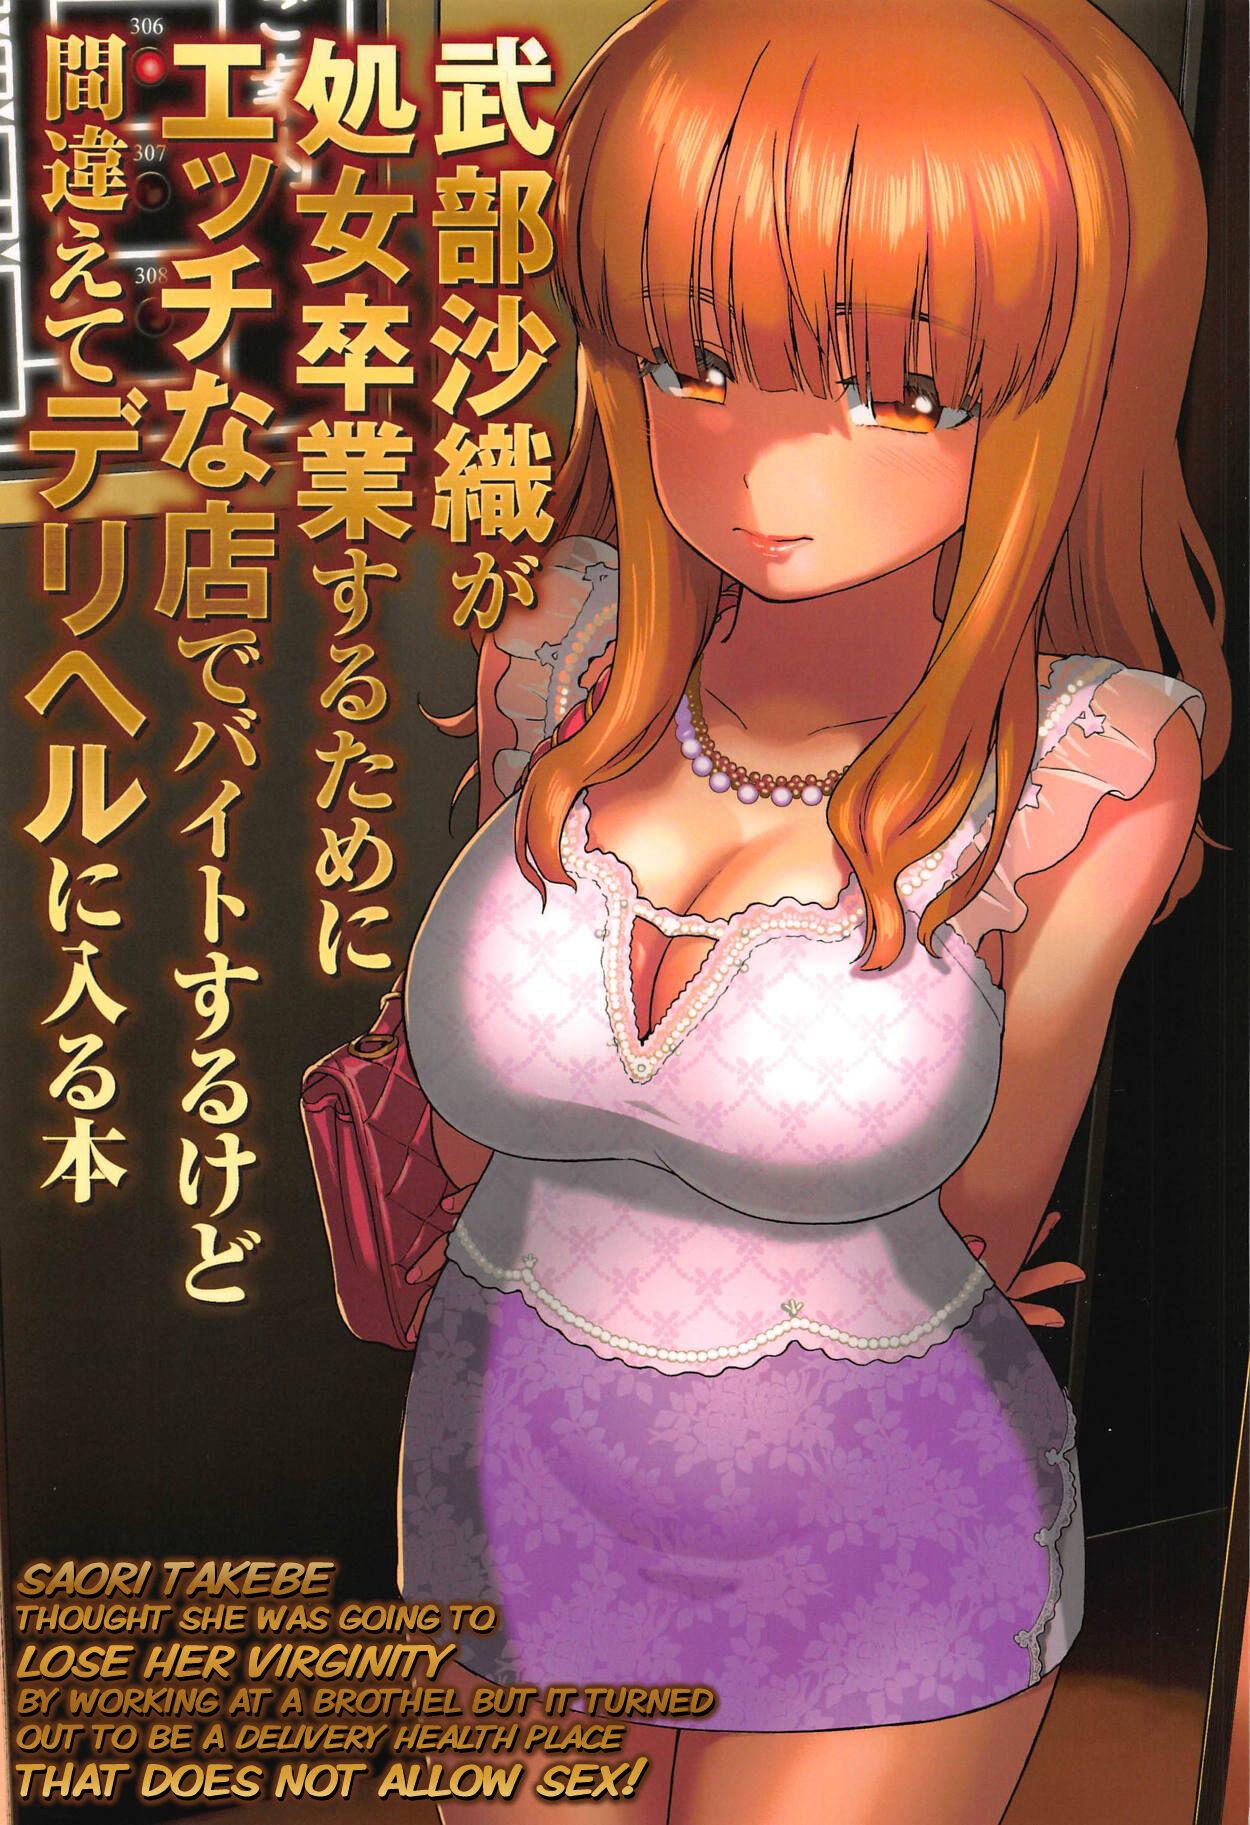 Saori Takebe Thought She Was Going to Lose Her Virginity by Working at a Brothel but it Turned Out to be a Delivery Health Establishment That Does Not Allow Sex 0